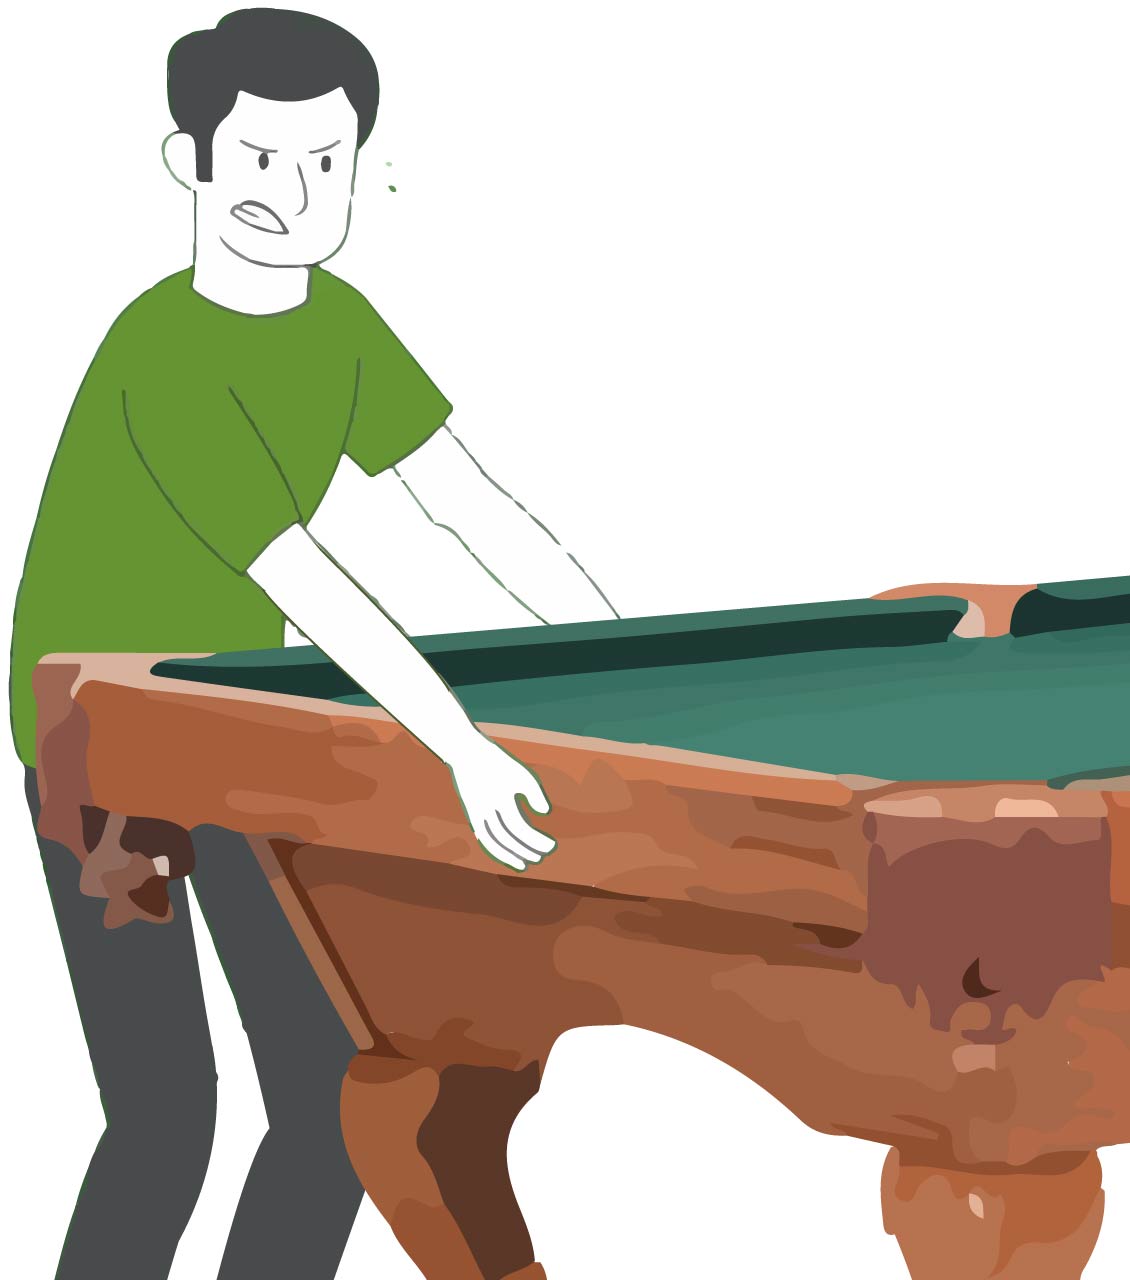 Miami Pool Table Removal & Disposal Services